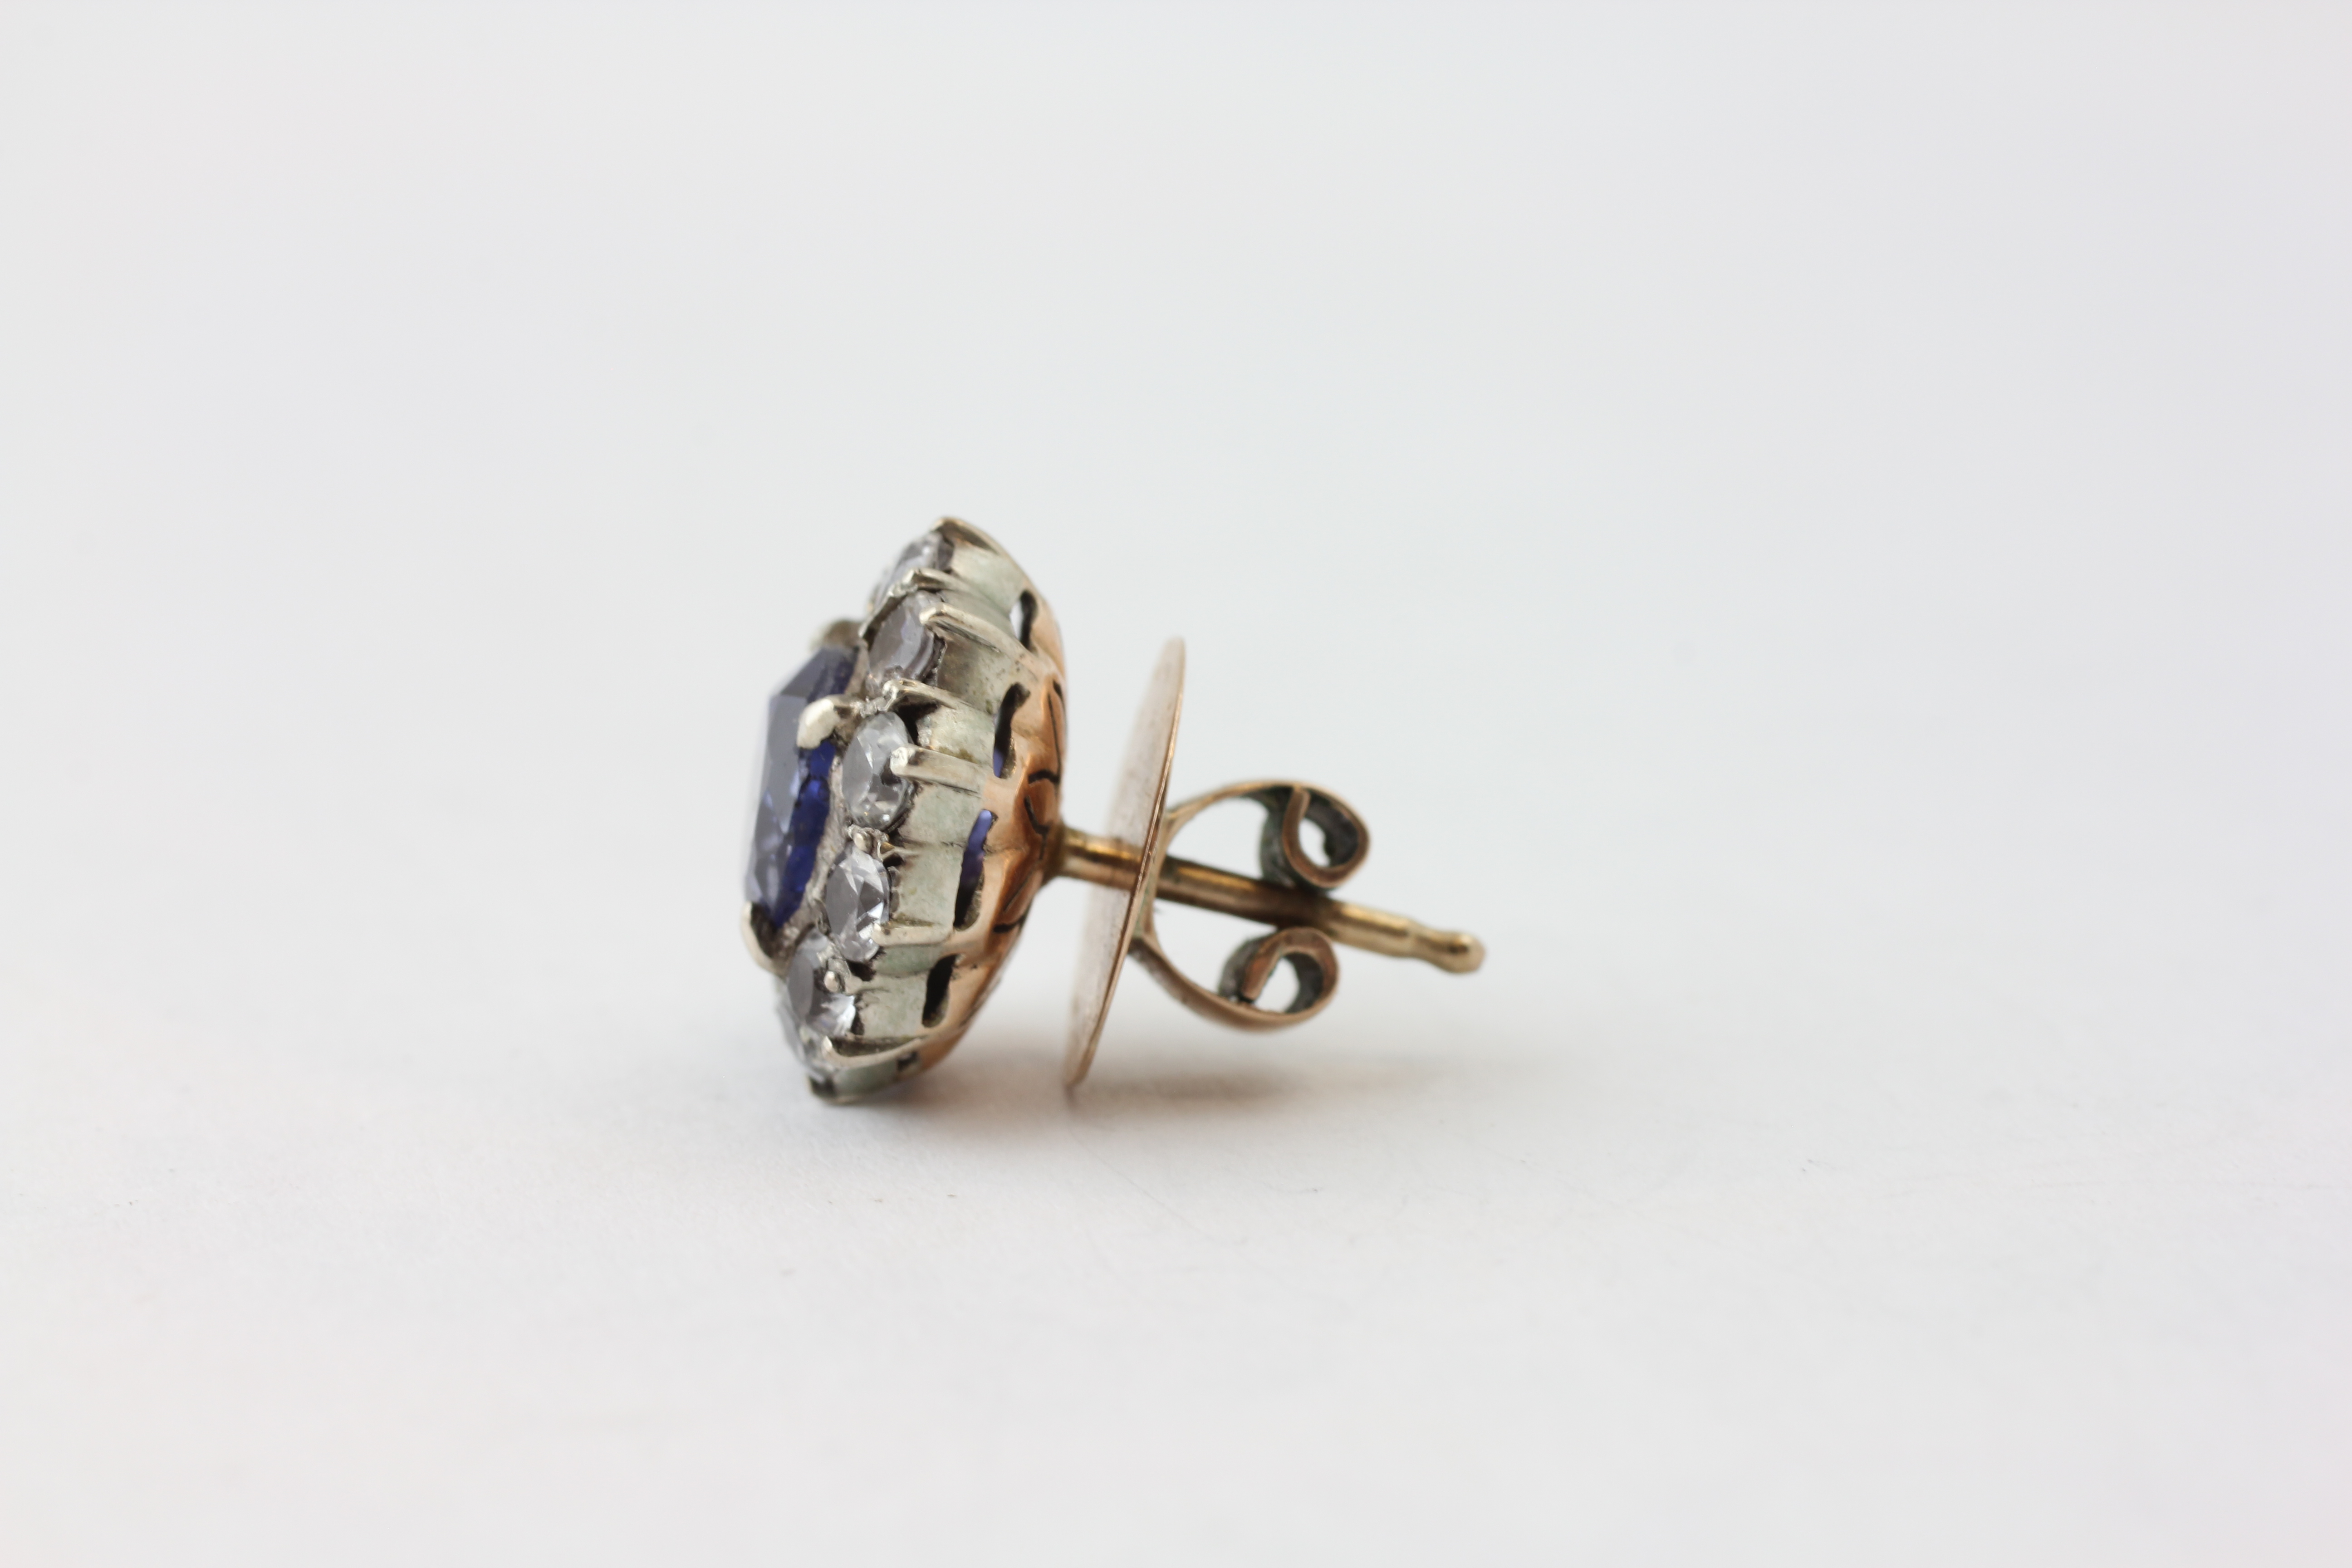 A PAIR OF SAPPHIRE AND DIAMOND STUD EARRINGS, THE PRINCIPAL STONES APPROX. - Image 6 of 6